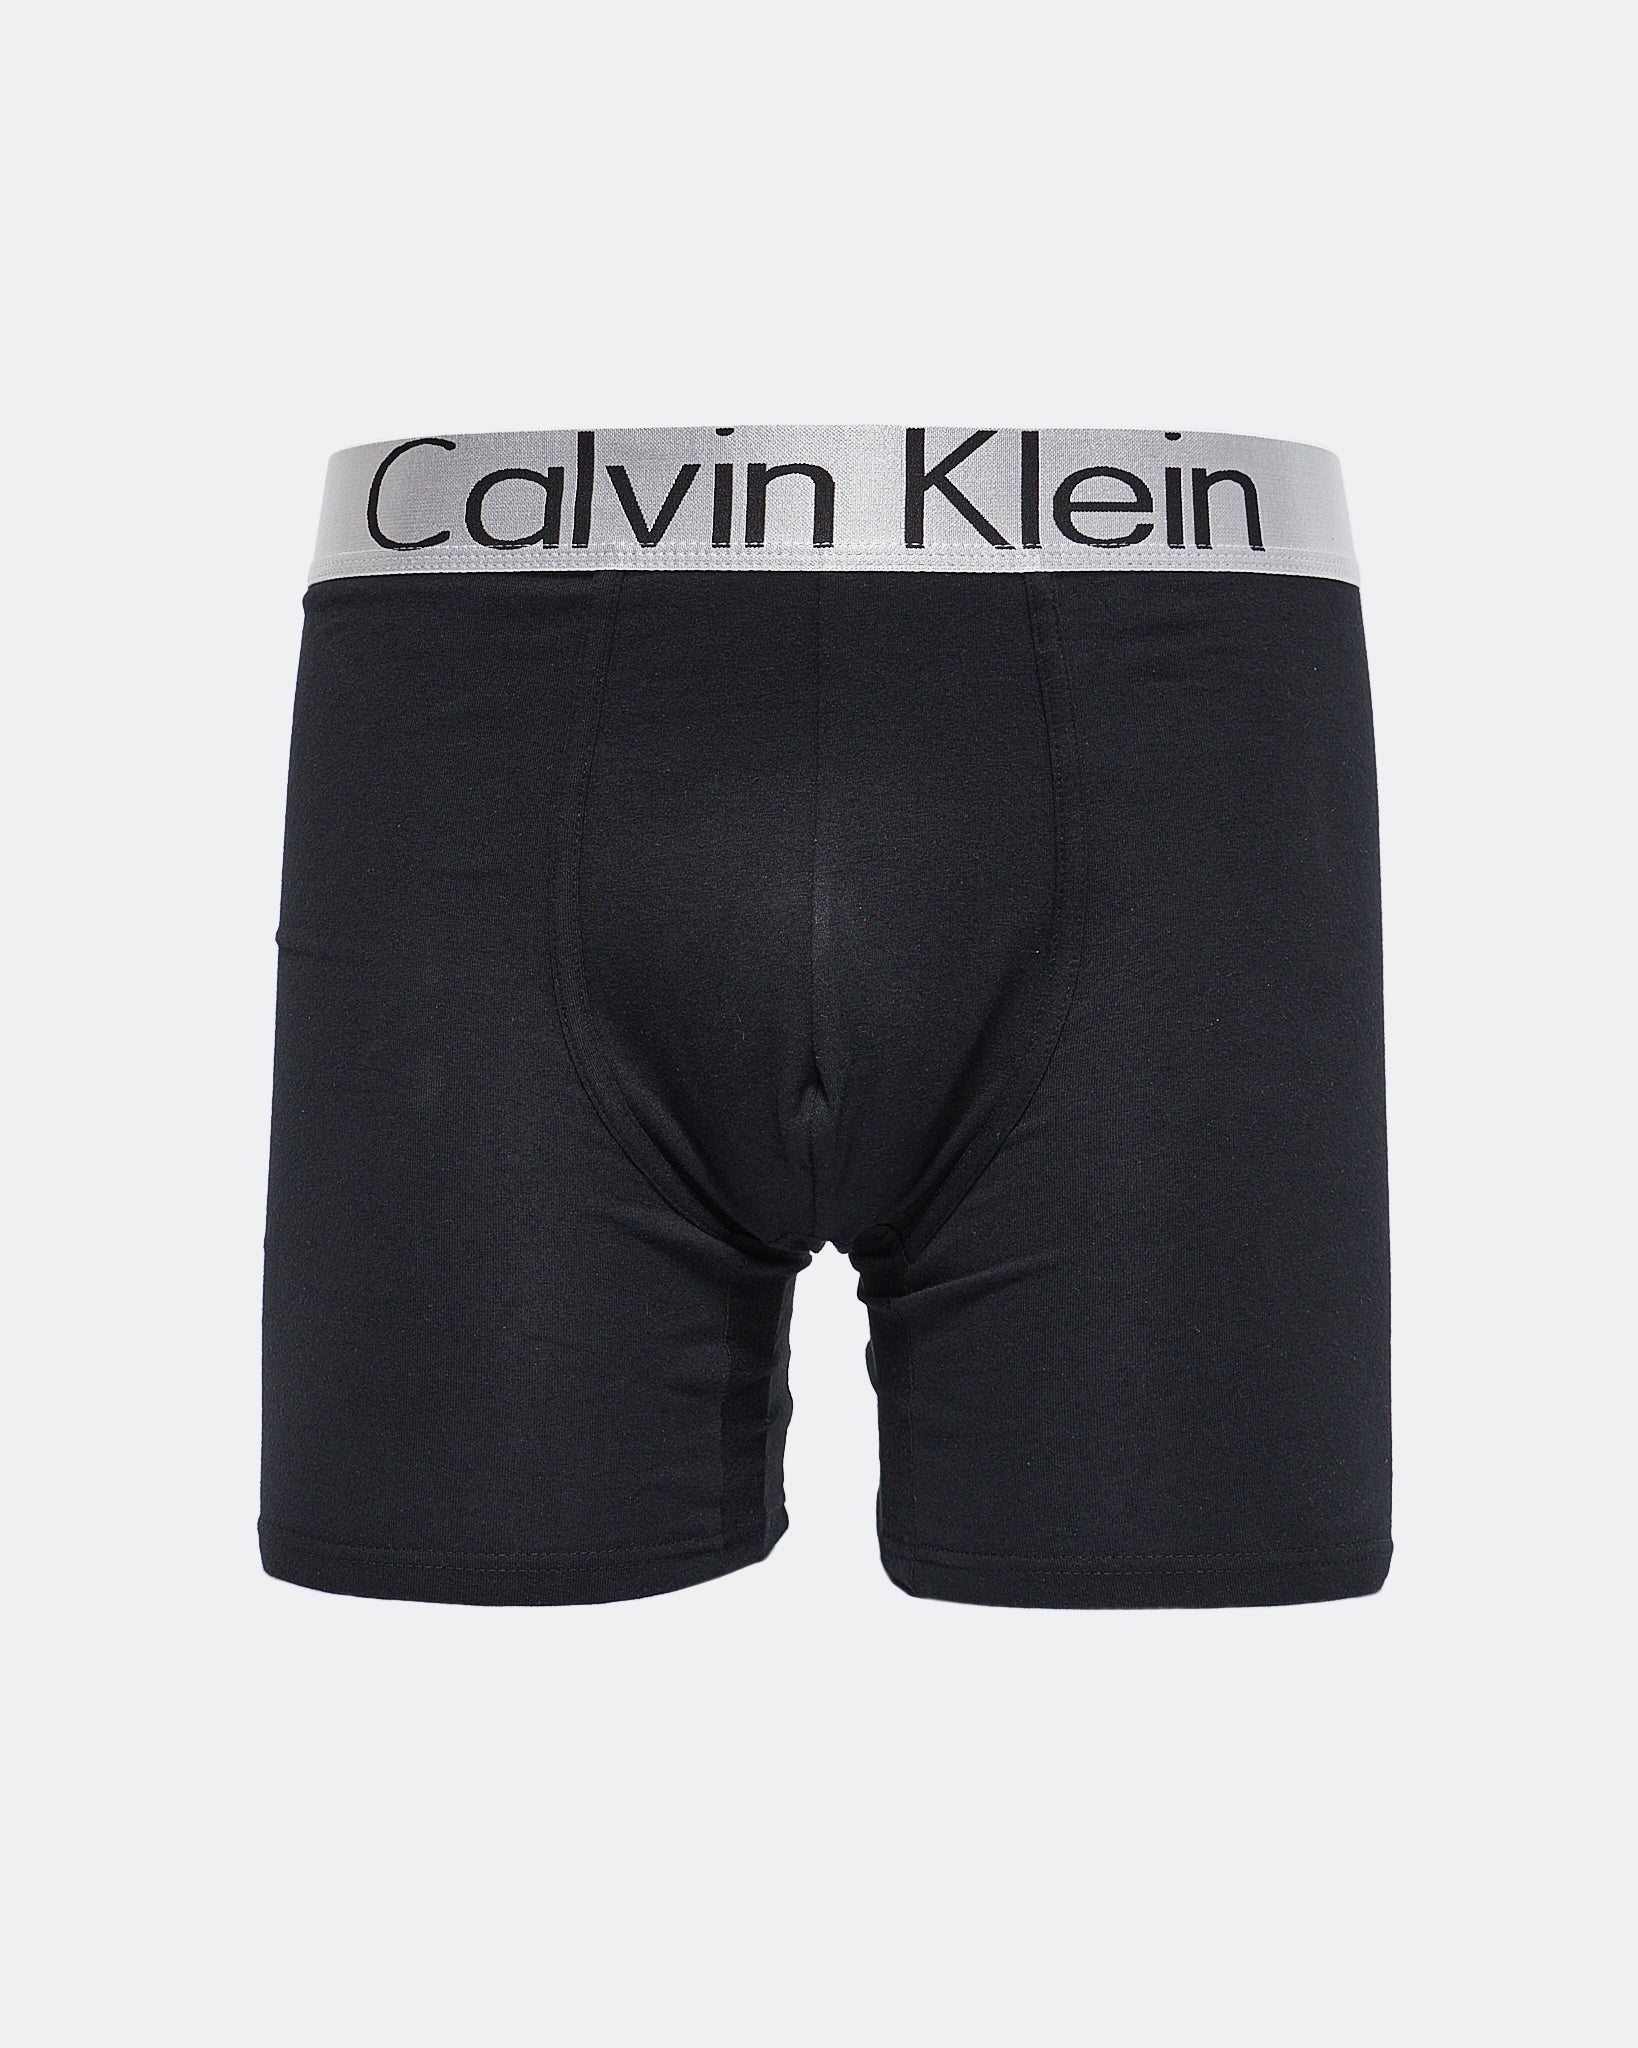 MOI OUTFIT-CK Logo Embroidered Men Underwear 5.90